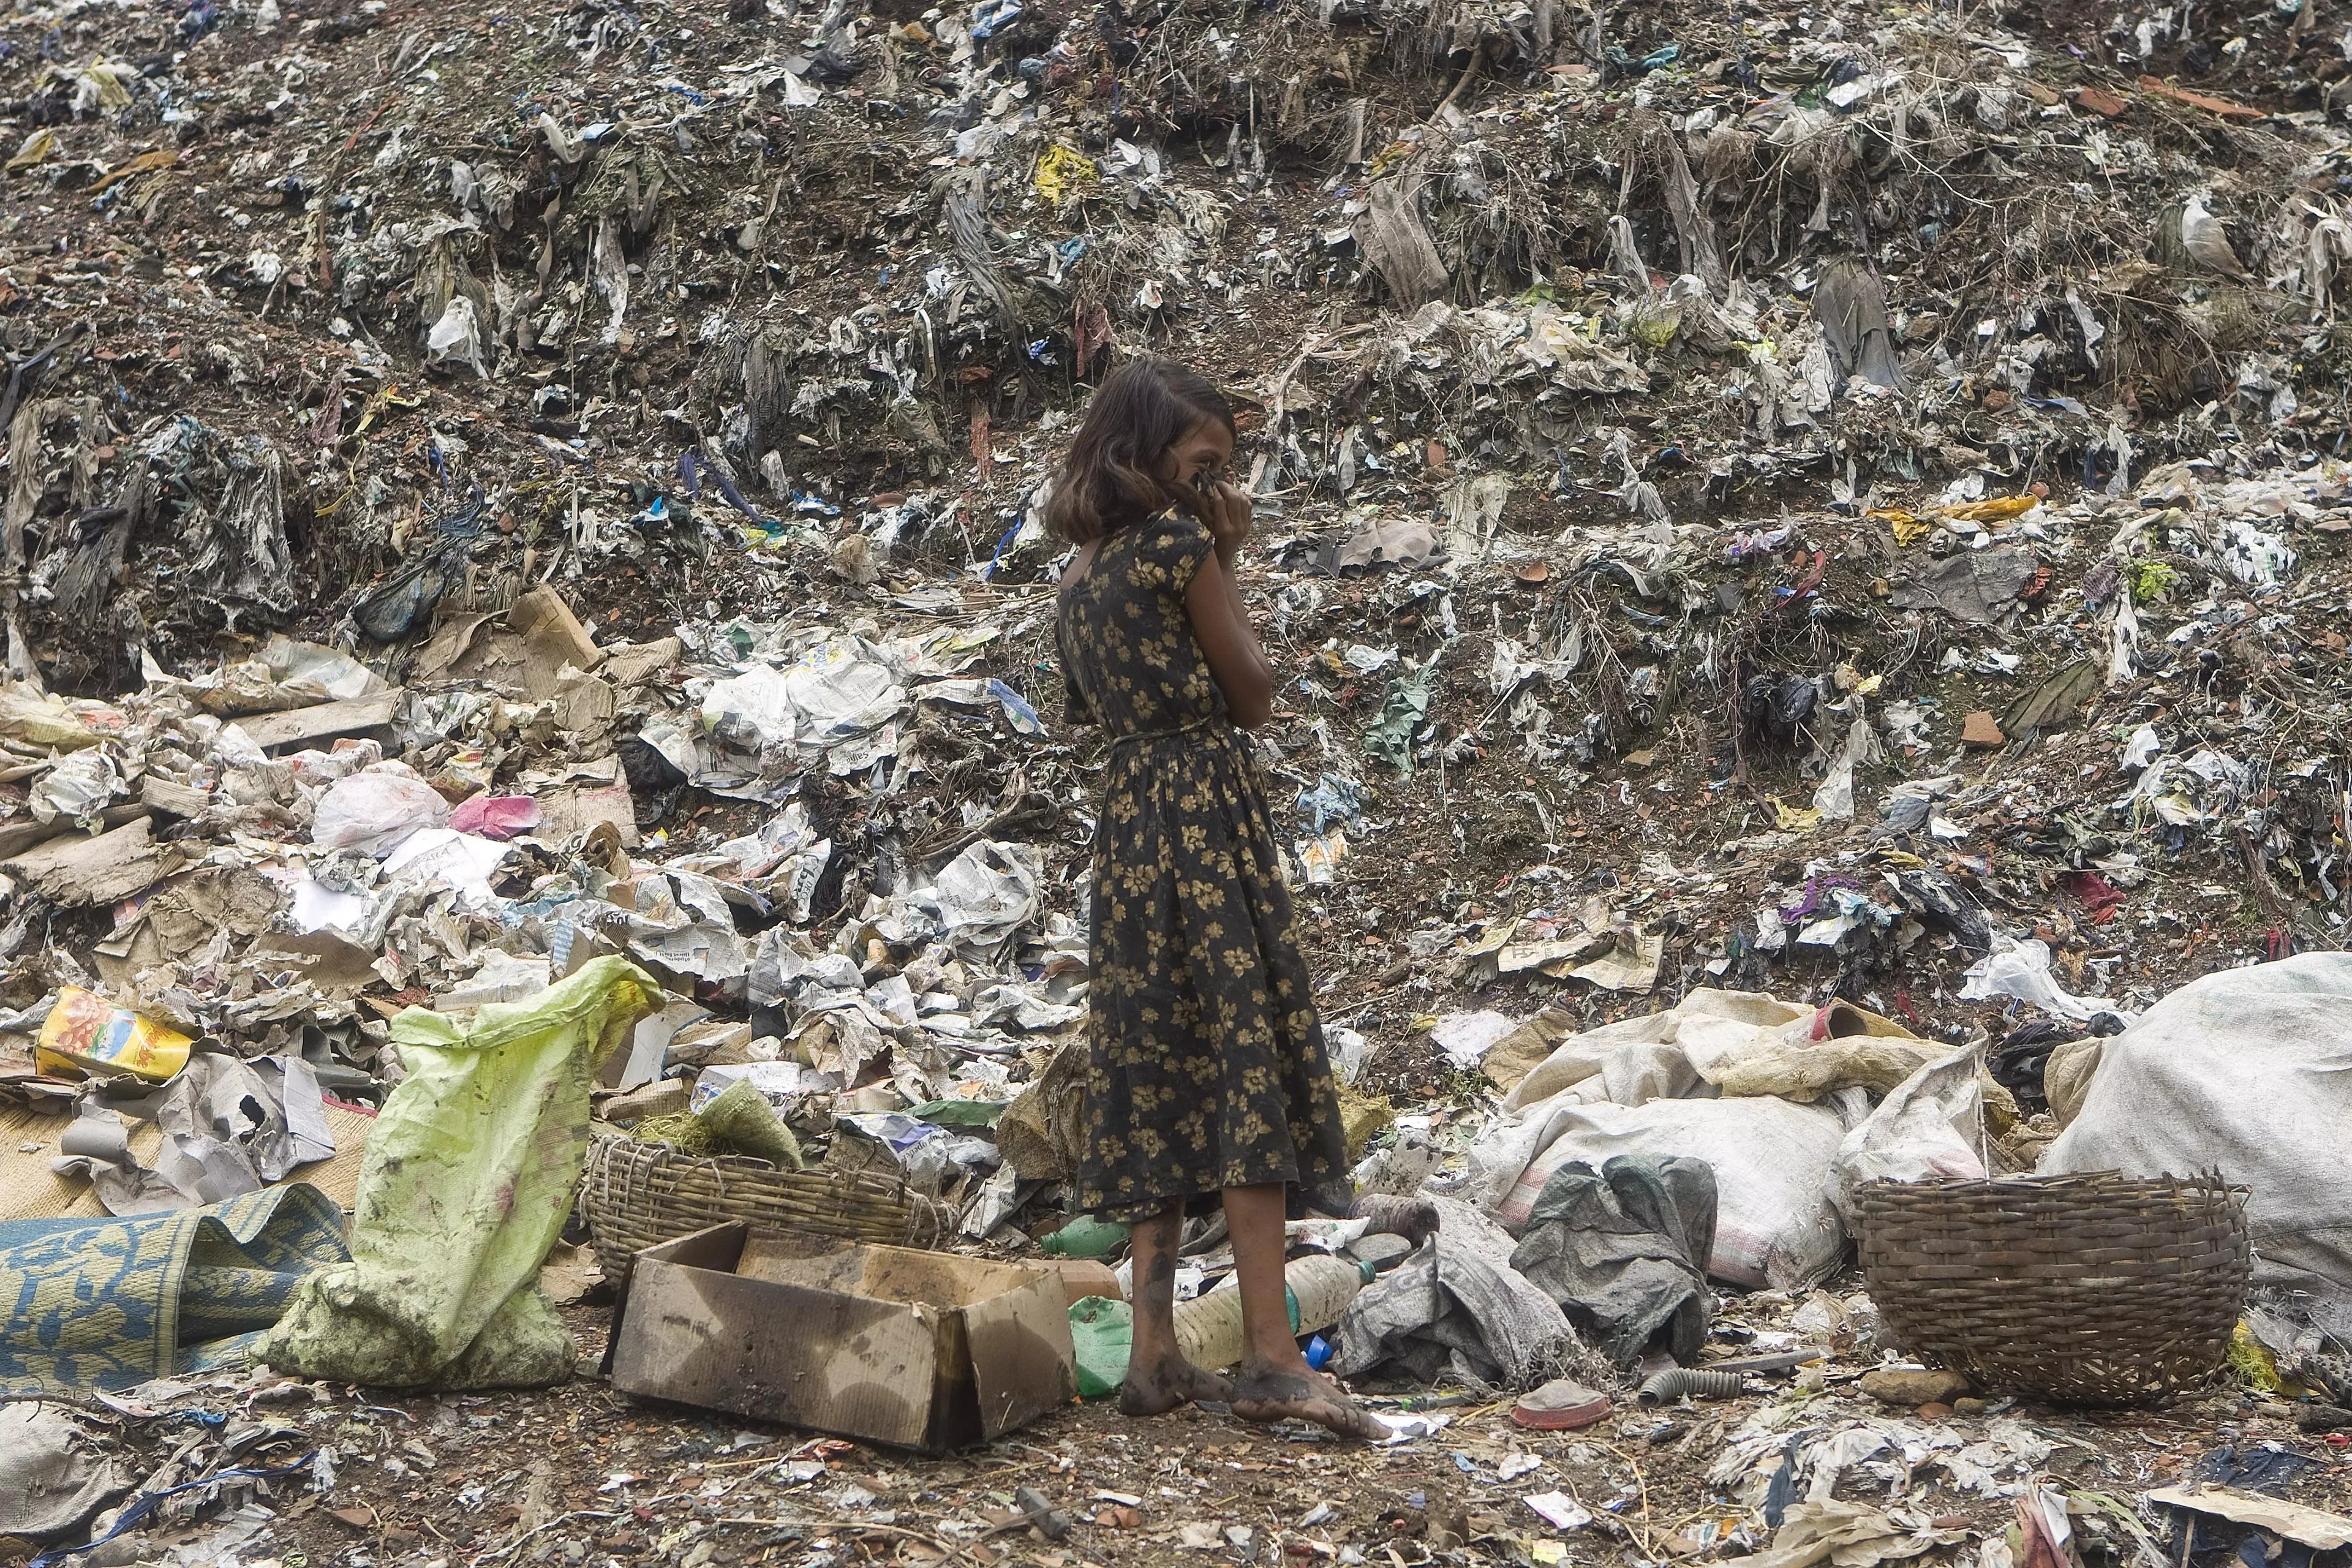 Pollution and rubbish is rife across India